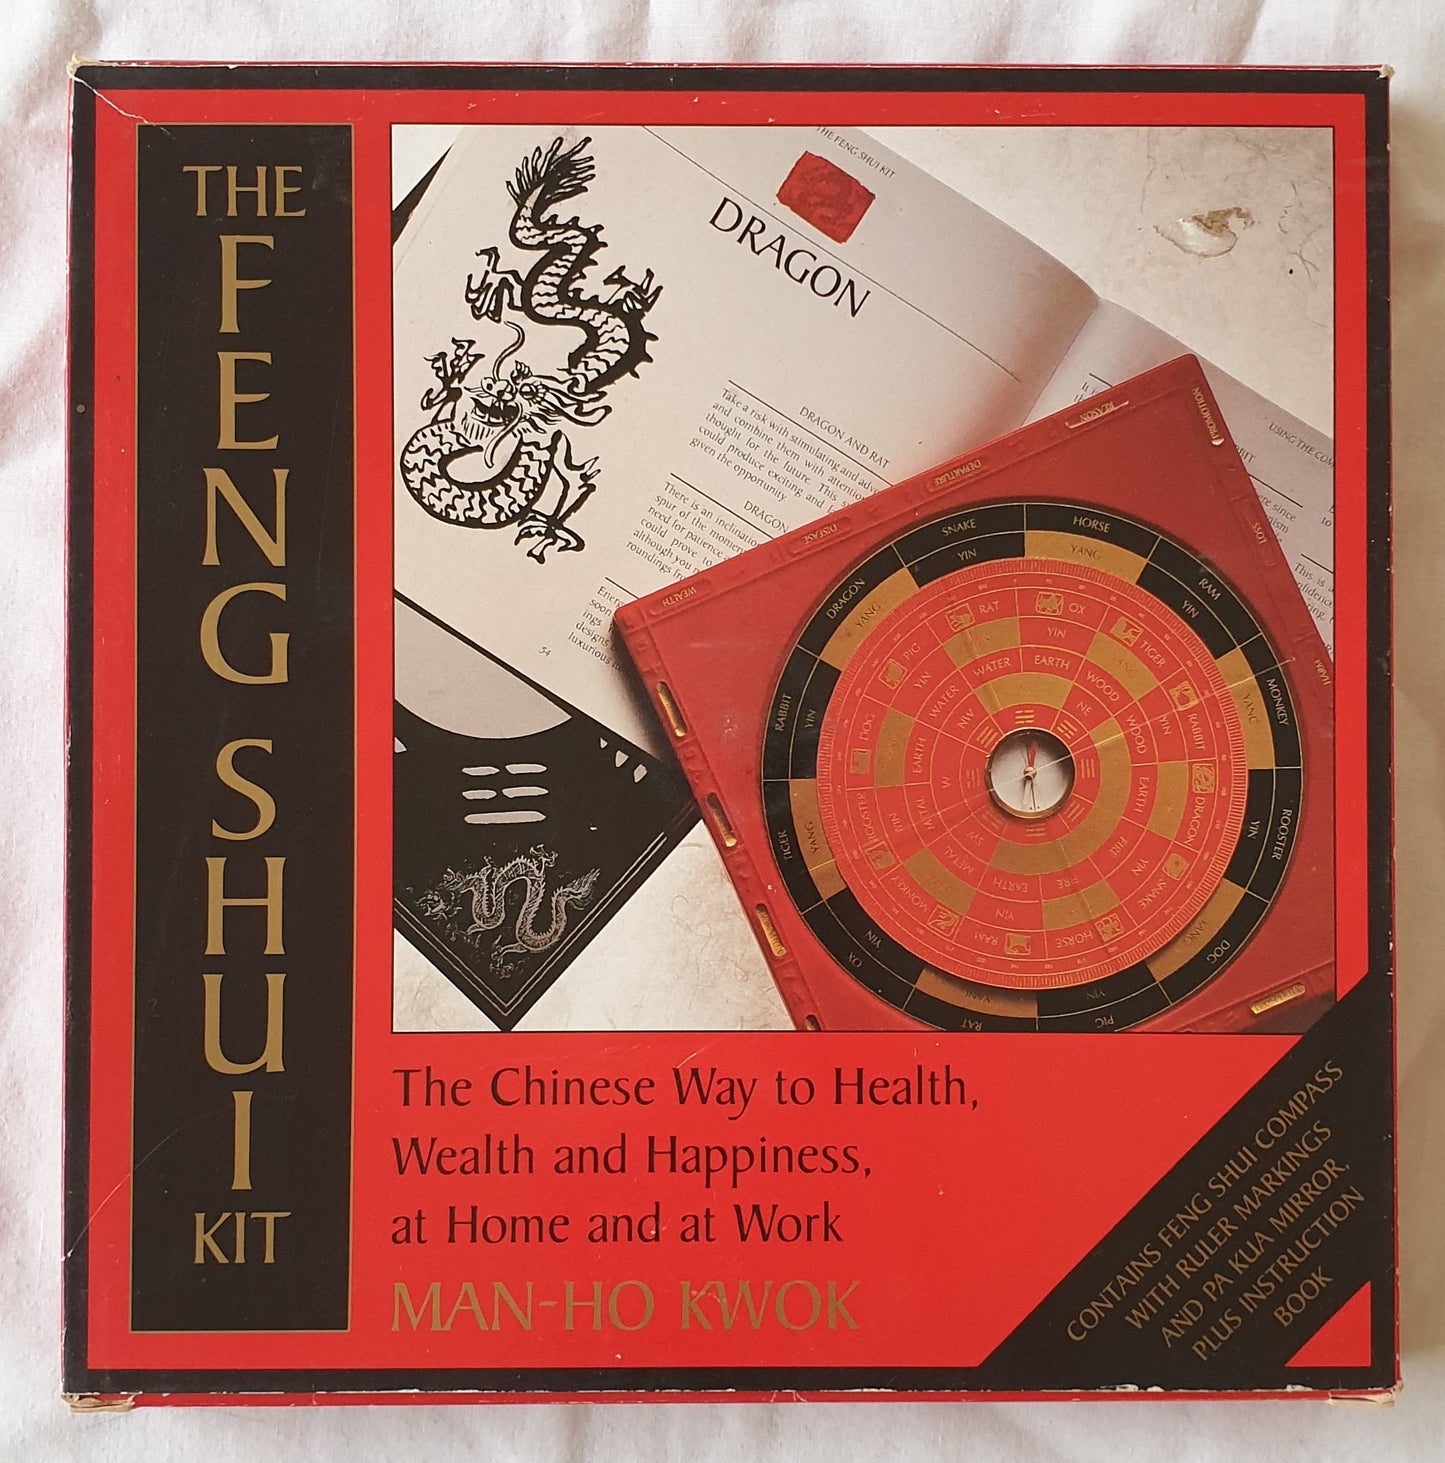 The Feng Shui Kit by Man-Ho Kwok